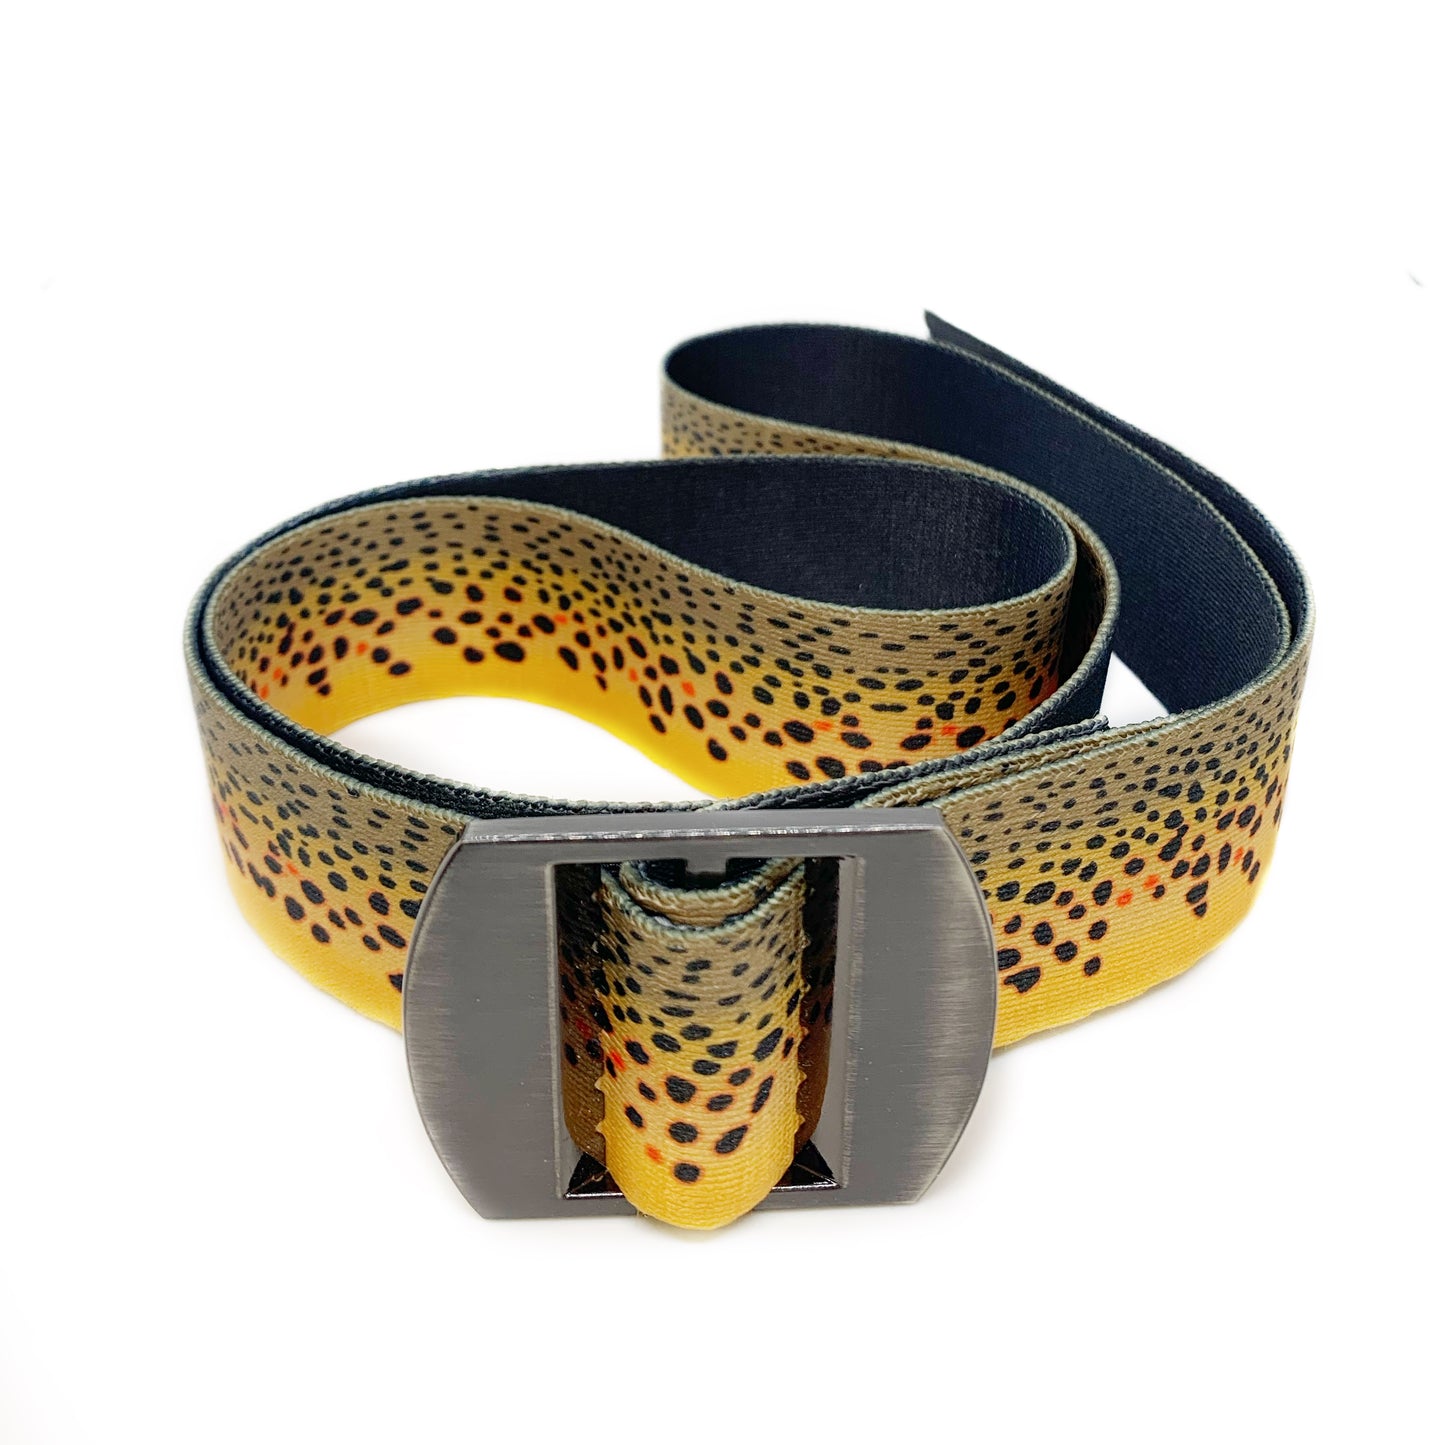 A nylon belt with a metal buckle has brown trout print